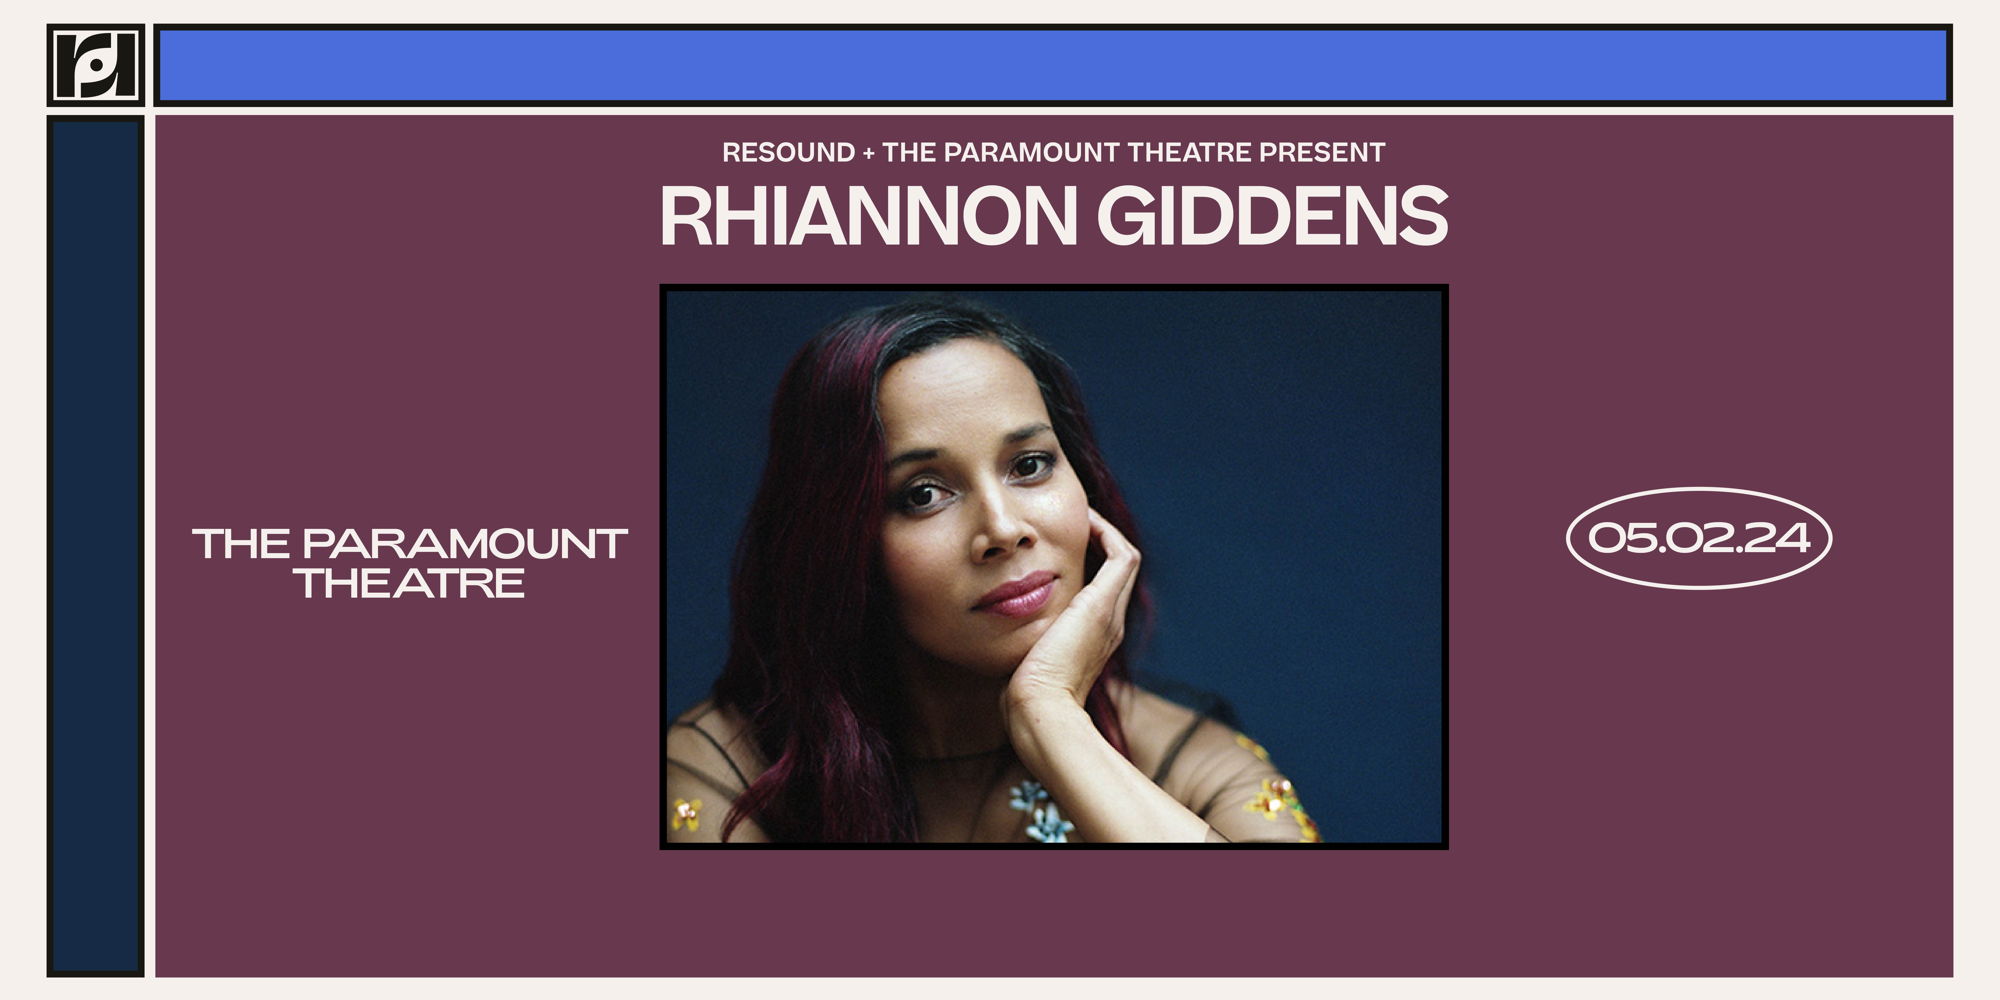 The Paramount Theatre & Resound Present: Rhiannon Giddens at The Paramount Theatre promotional image